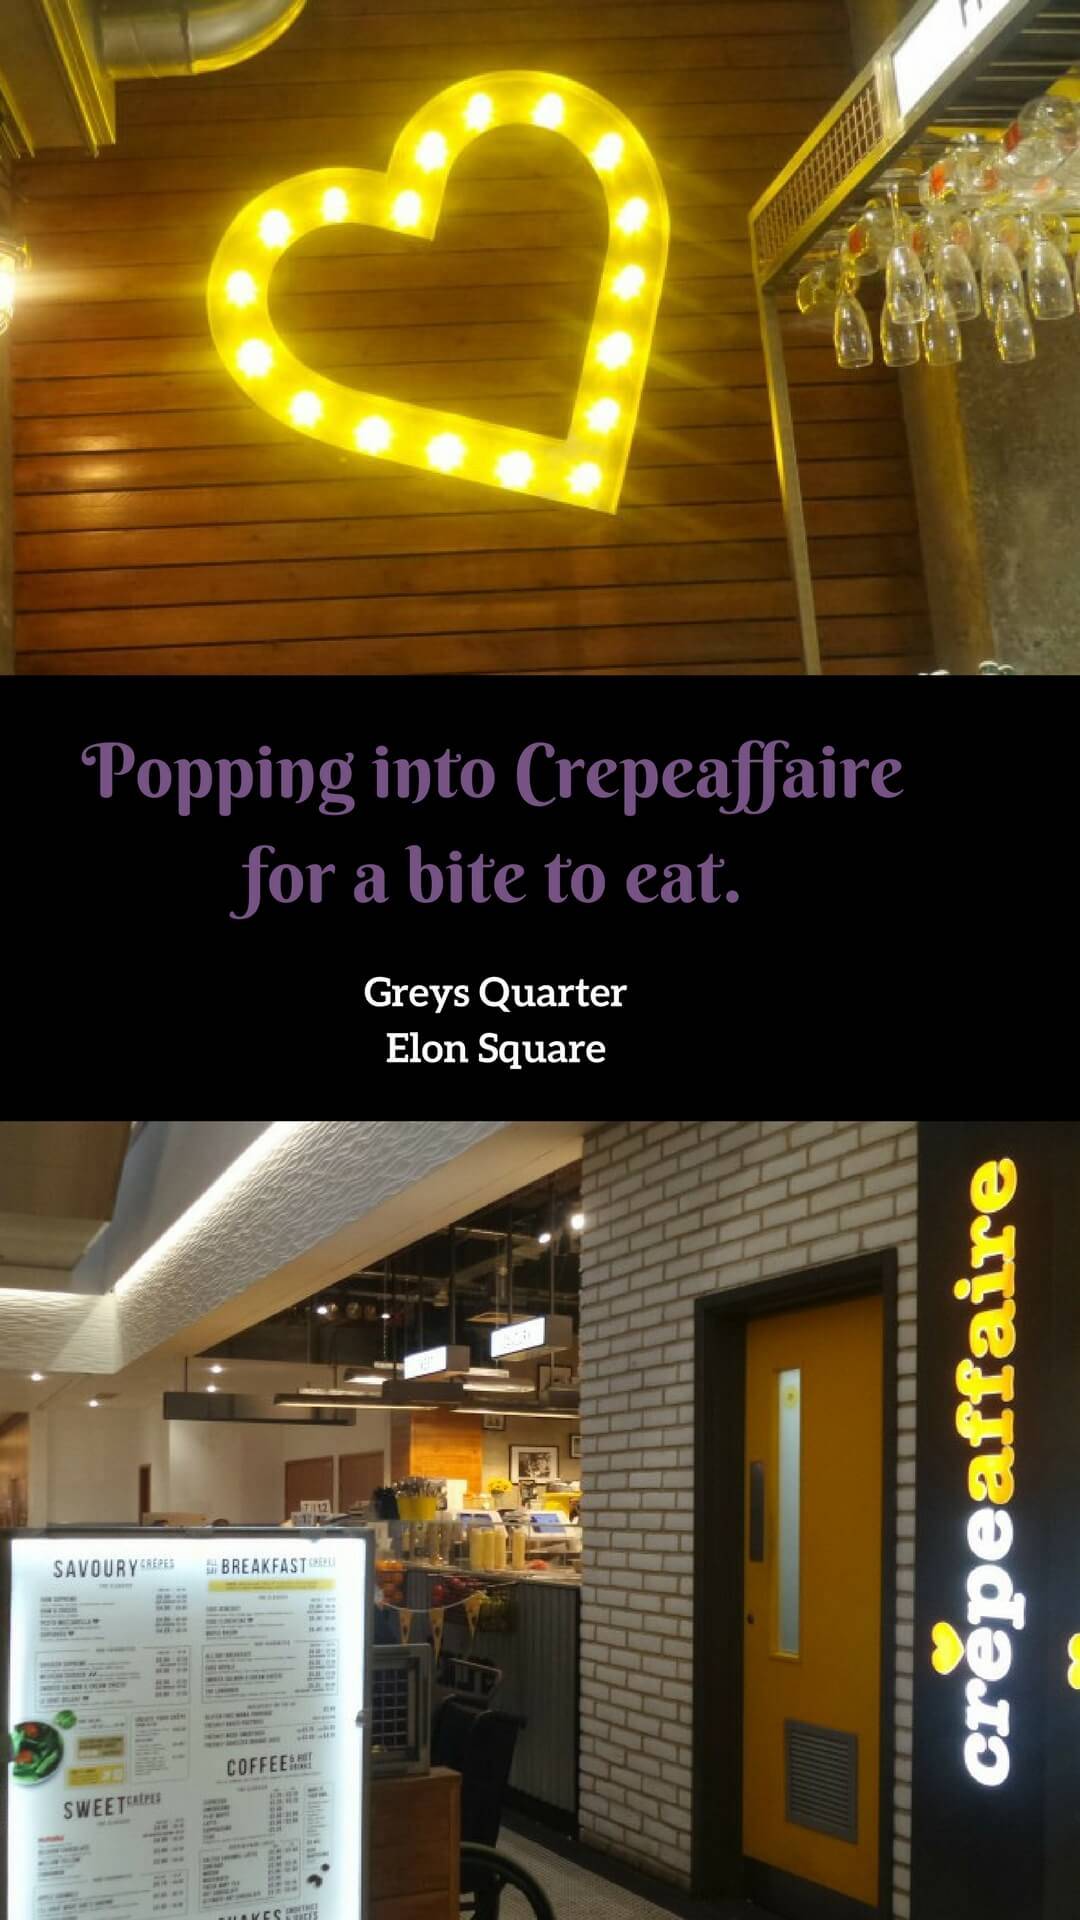 Popping into crepeaffaire Newcastle for a bite to eat. We enjoyed indulgent crepes and milkshakes